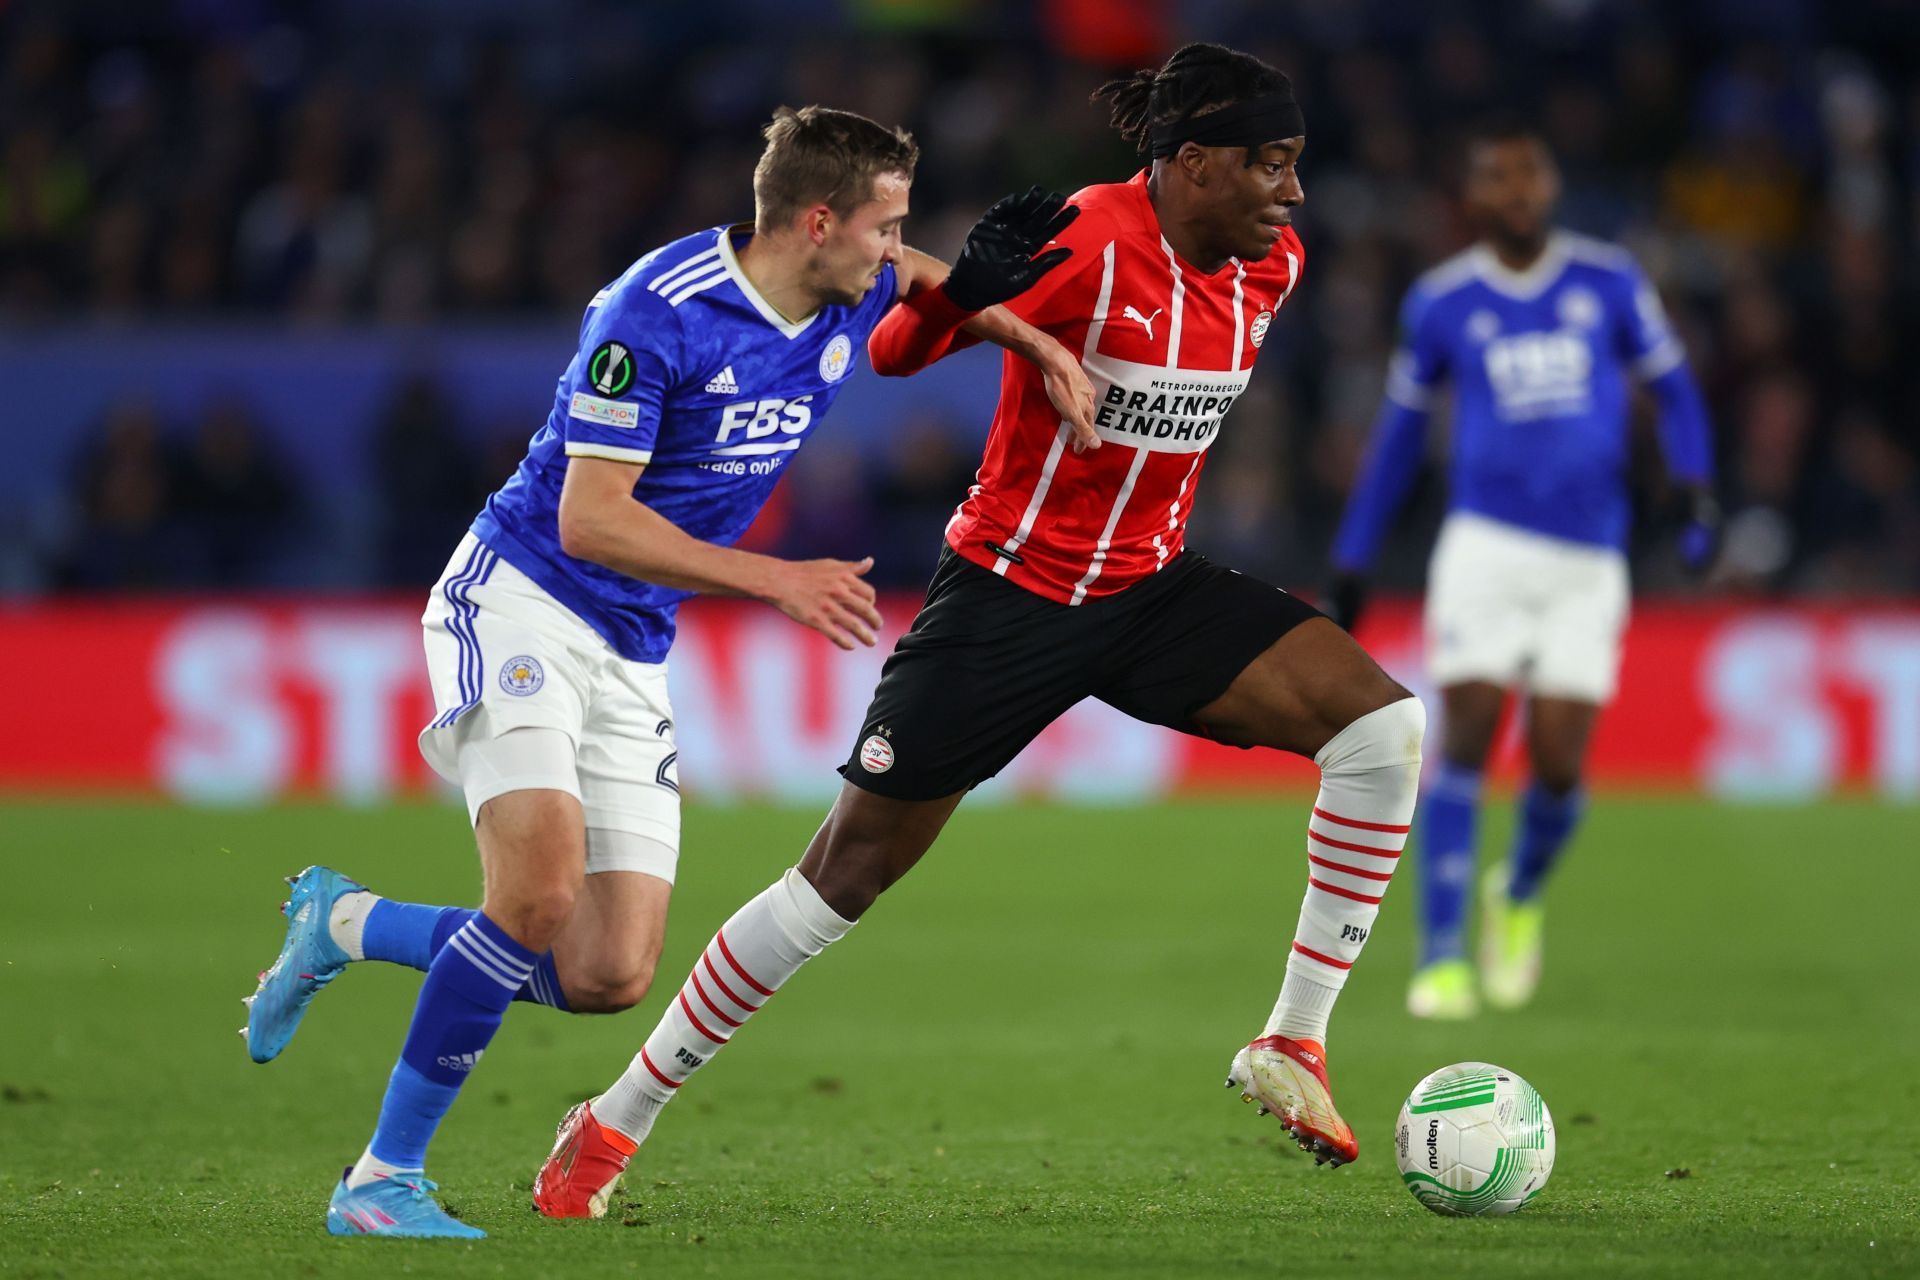 PSV Eindhoven will host Leicester City on Thursday - UEFA Europa Conference League